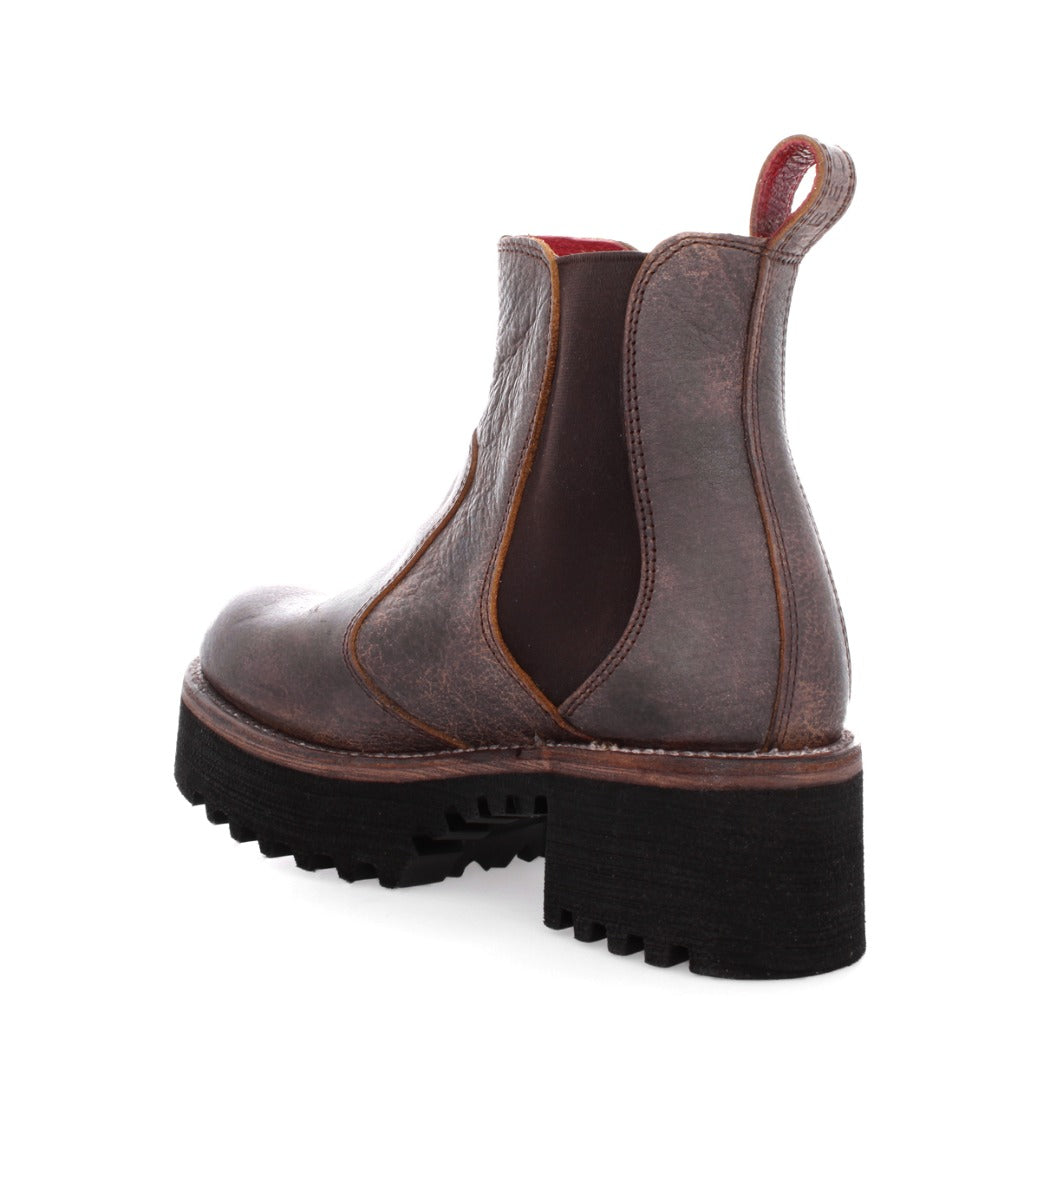 A brown leather Valda Hi chelsea boot with a black sole by Bed Stu.